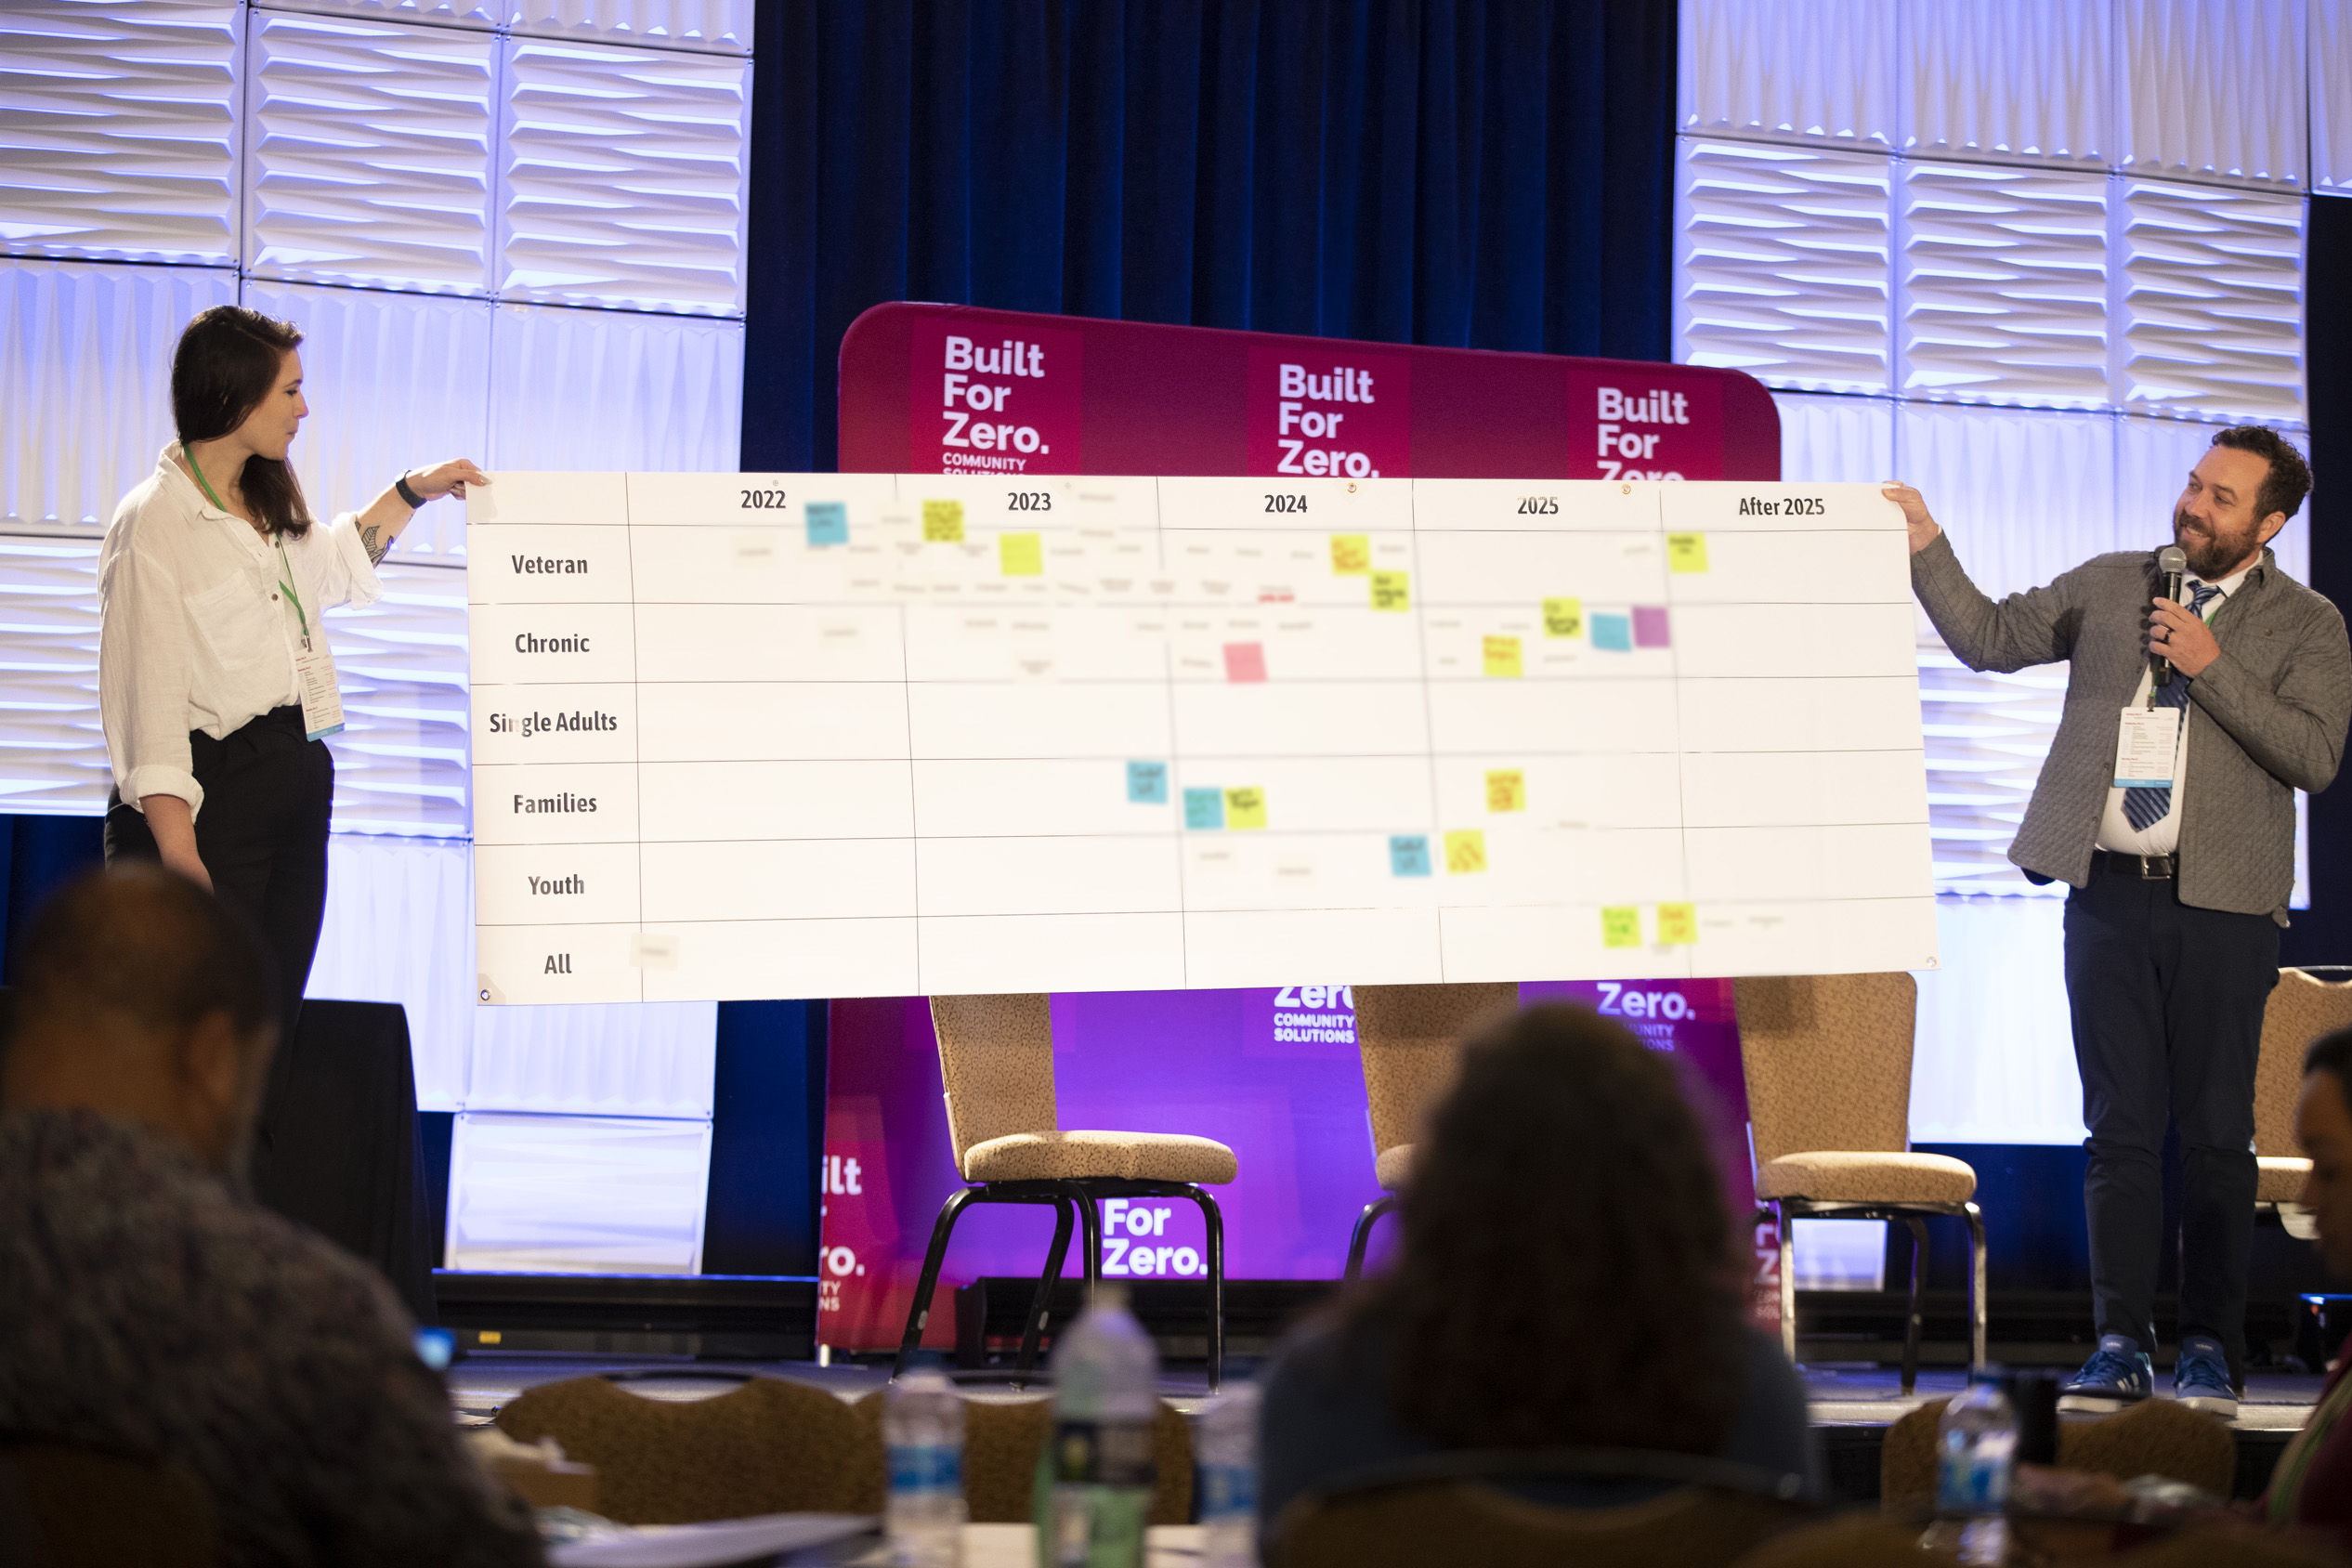 Built for Zero Strategy Lead, Emma Beers, and Portfolio Lead, Nate French, reveal the goals set by different community leaders. (Photo credit: Isavel Gonzalez)